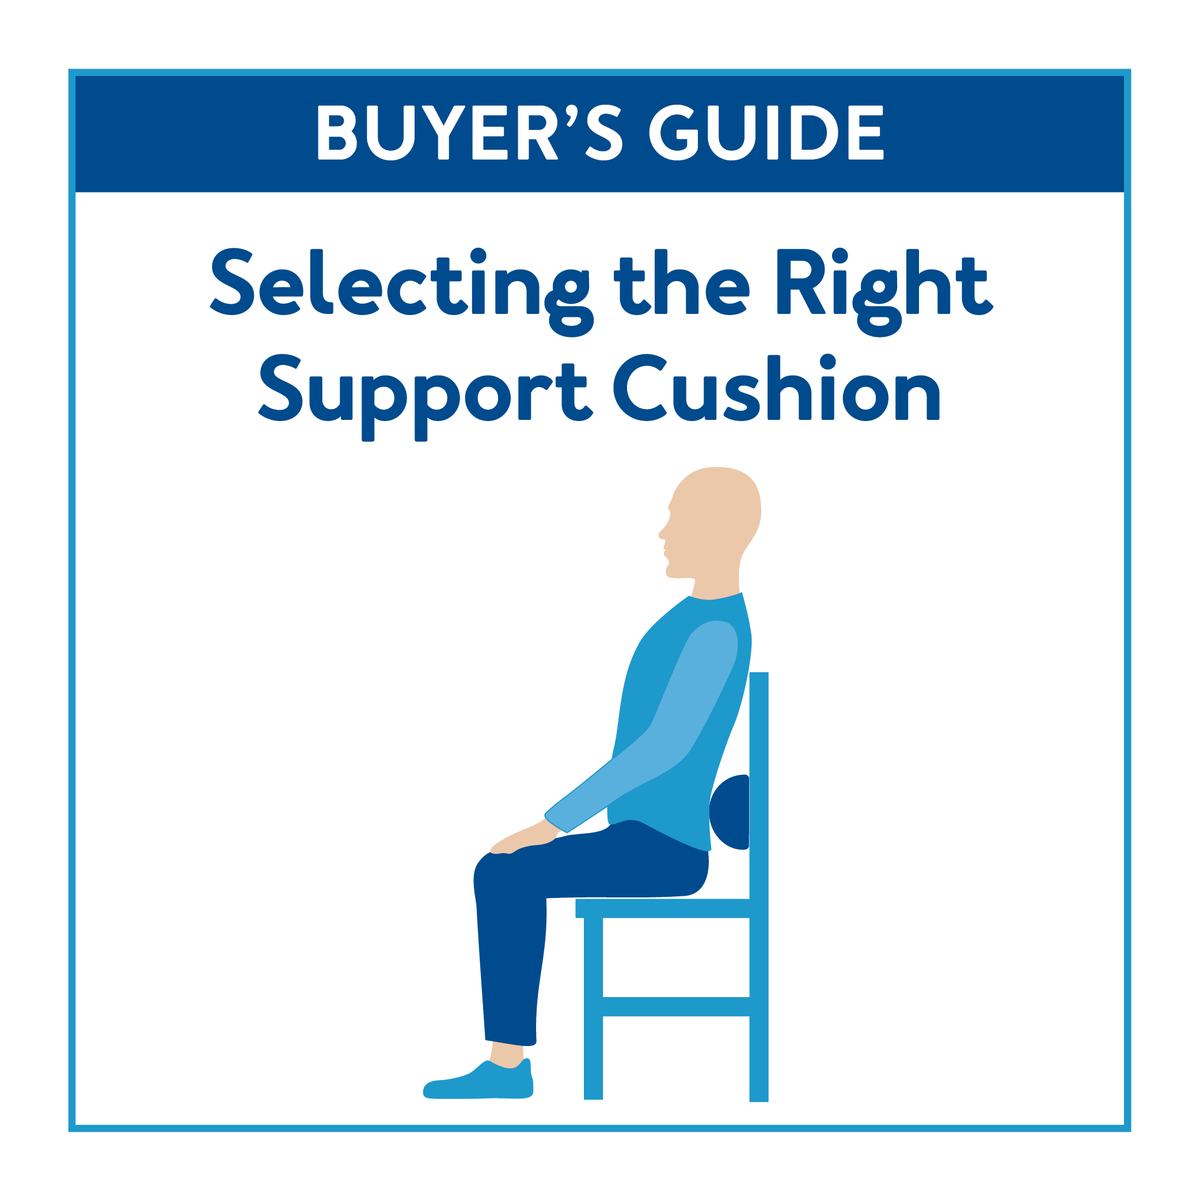 Cover image for the Support Cushion Buyer’s Guide with a cartoon character sitting on a chair 